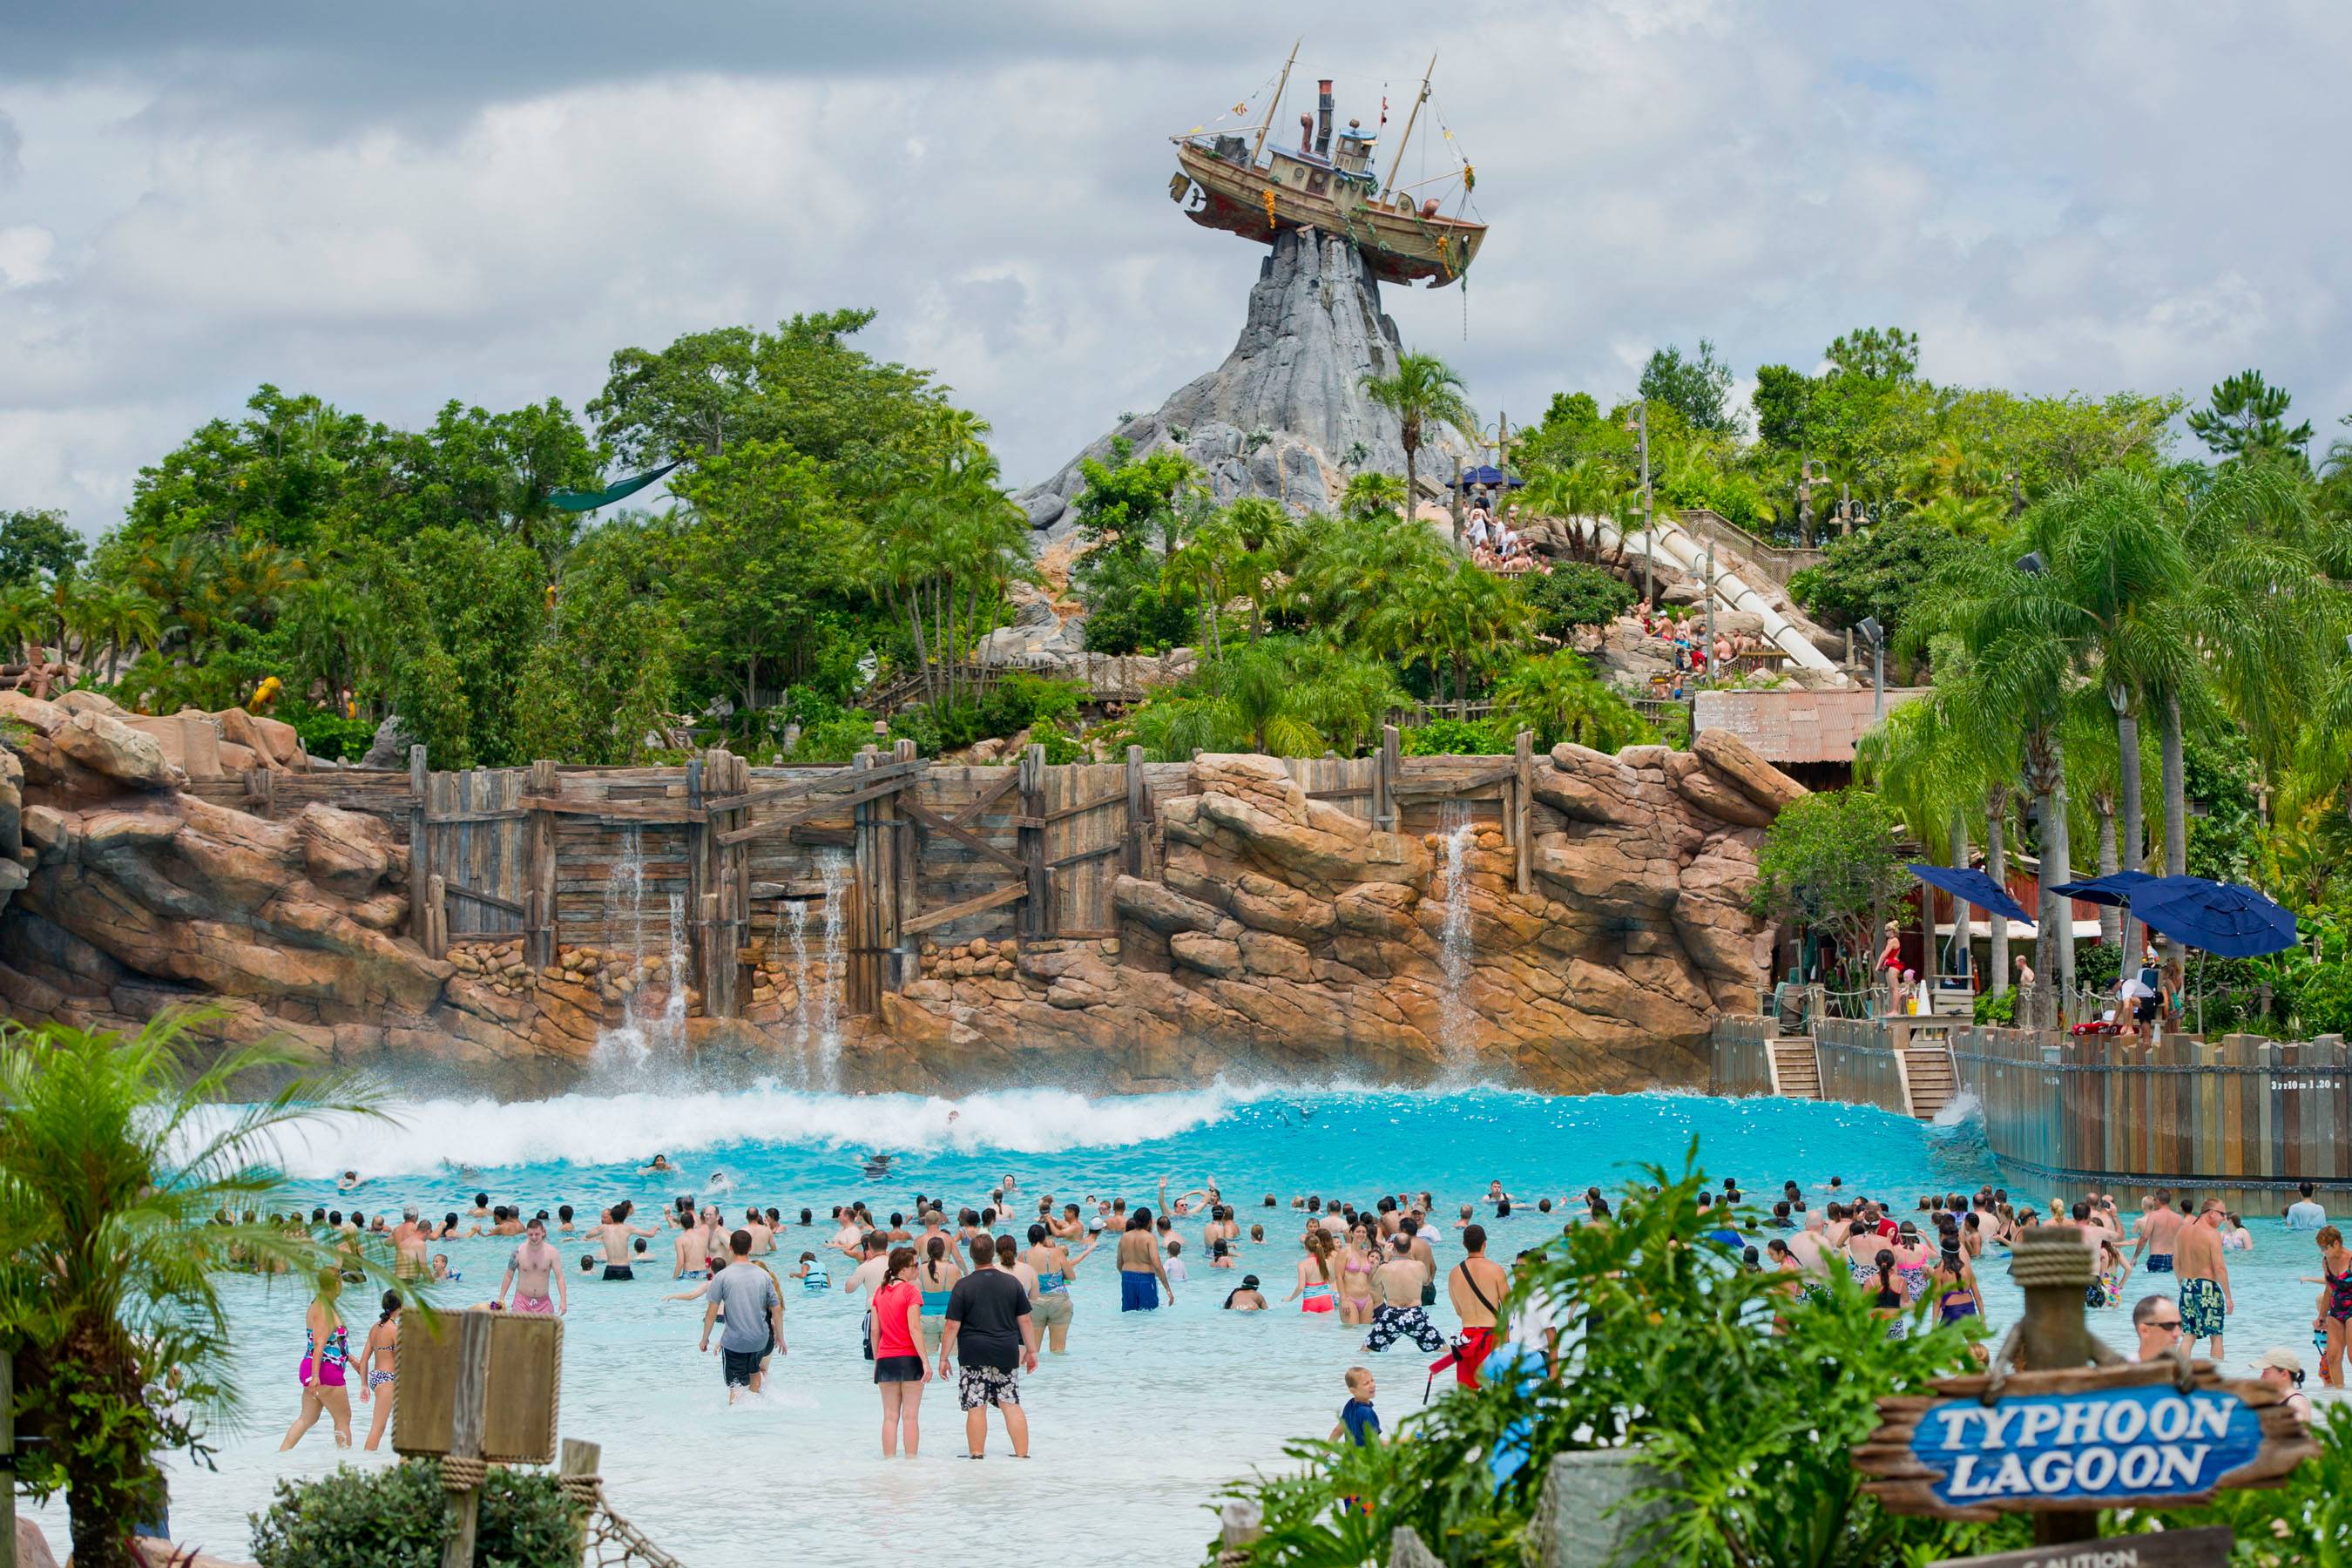 Typhoon Lagoon closed Wednesday due to weather